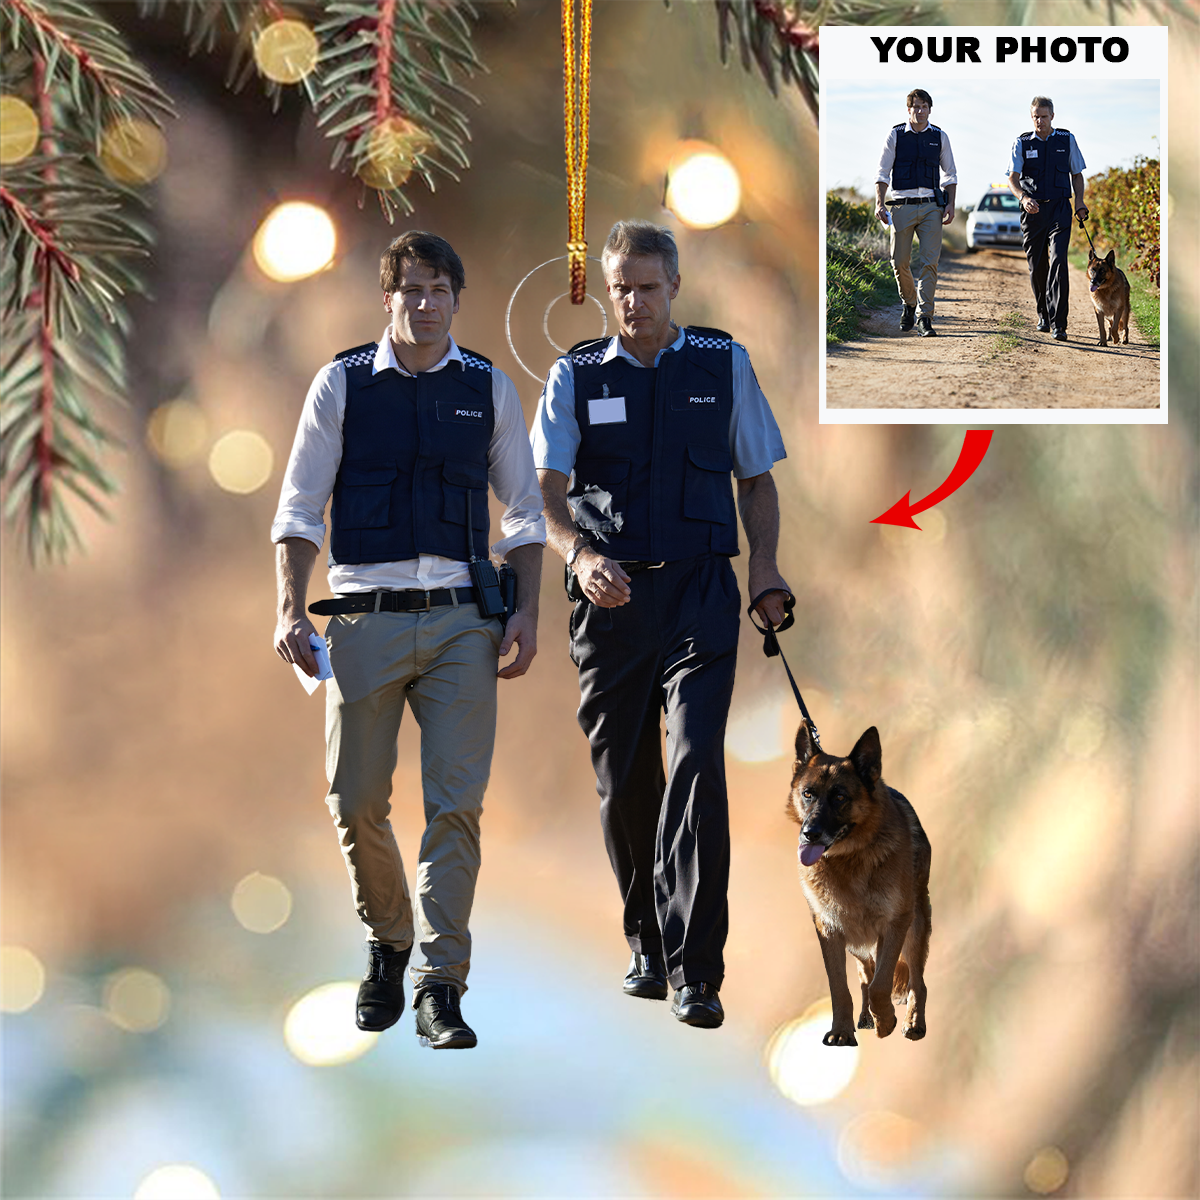 Police Dog - Personalized Photo Mica Ornament - Customized Your Photo Ornament - Christmas Gift For Police Officers, Dog Lovers